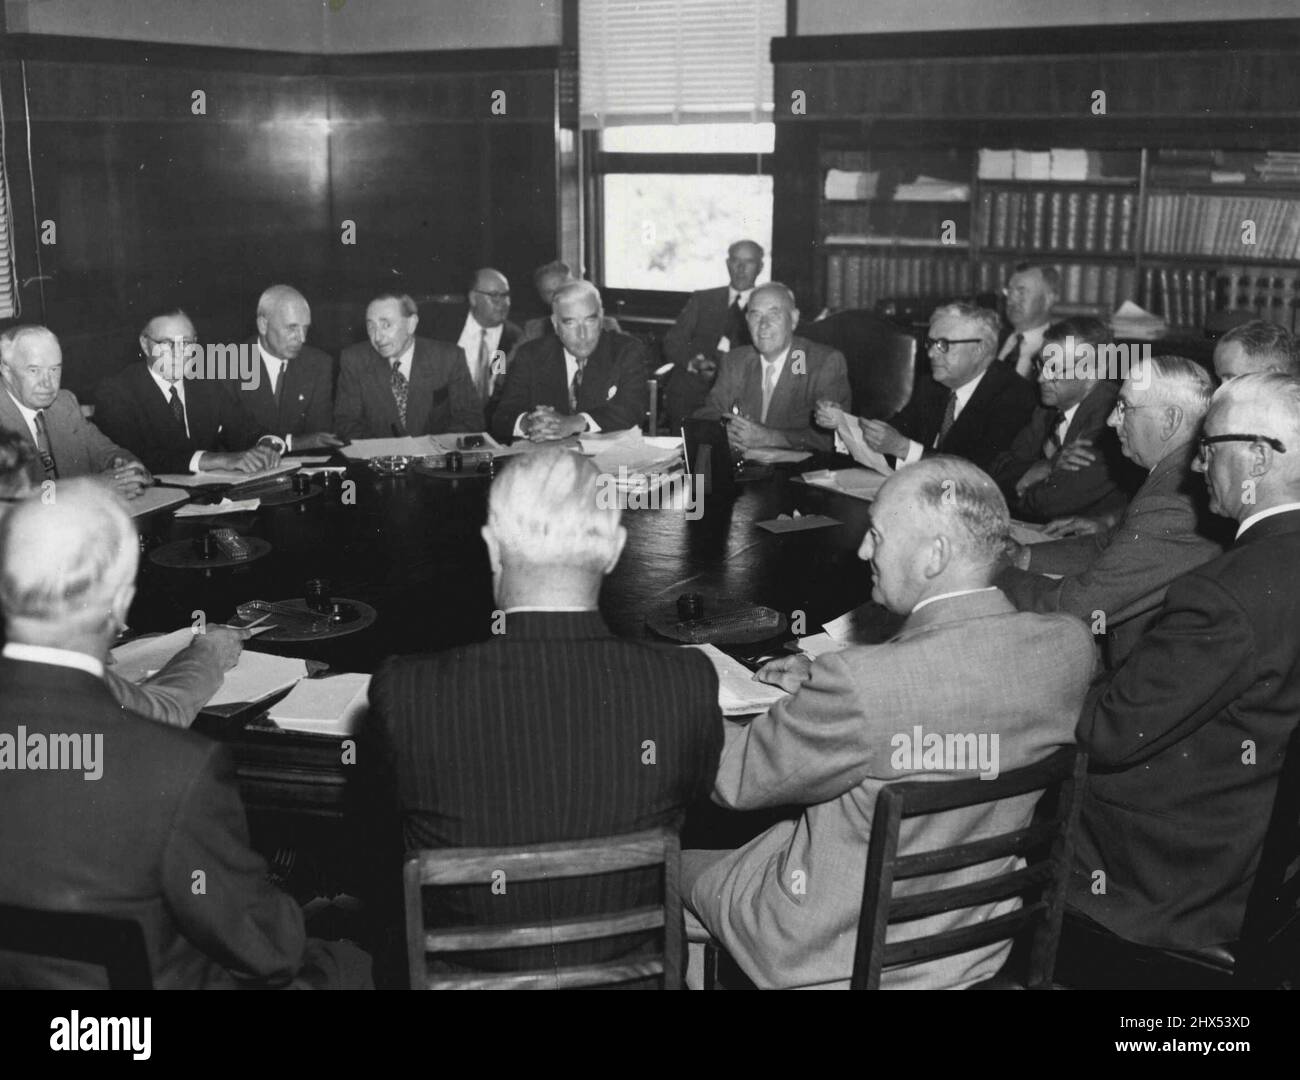 The Fate of the Olympic Games Site rested in the hands of these men today. From left to right Sir Herbert Hyland; Victorian Opposition leader, Mr Oldham; Mr H. C. Newman, Commonwealth representative in the Olympic Council; Mr E. Tanner; the deputy Premier, Mr Galvin (background); the Prime Minister, Mr Menzies; the Premier, Mr Cain; Dr. Evatt, Federal Opposition leader; Mr Coleman, Minister for Transport; Mr Barry, Minister for Health; Mr Ken Luke, president of Carlton Football Club, and Mr A. W. Coles, chairman. January 30, 1953. Stock Photo